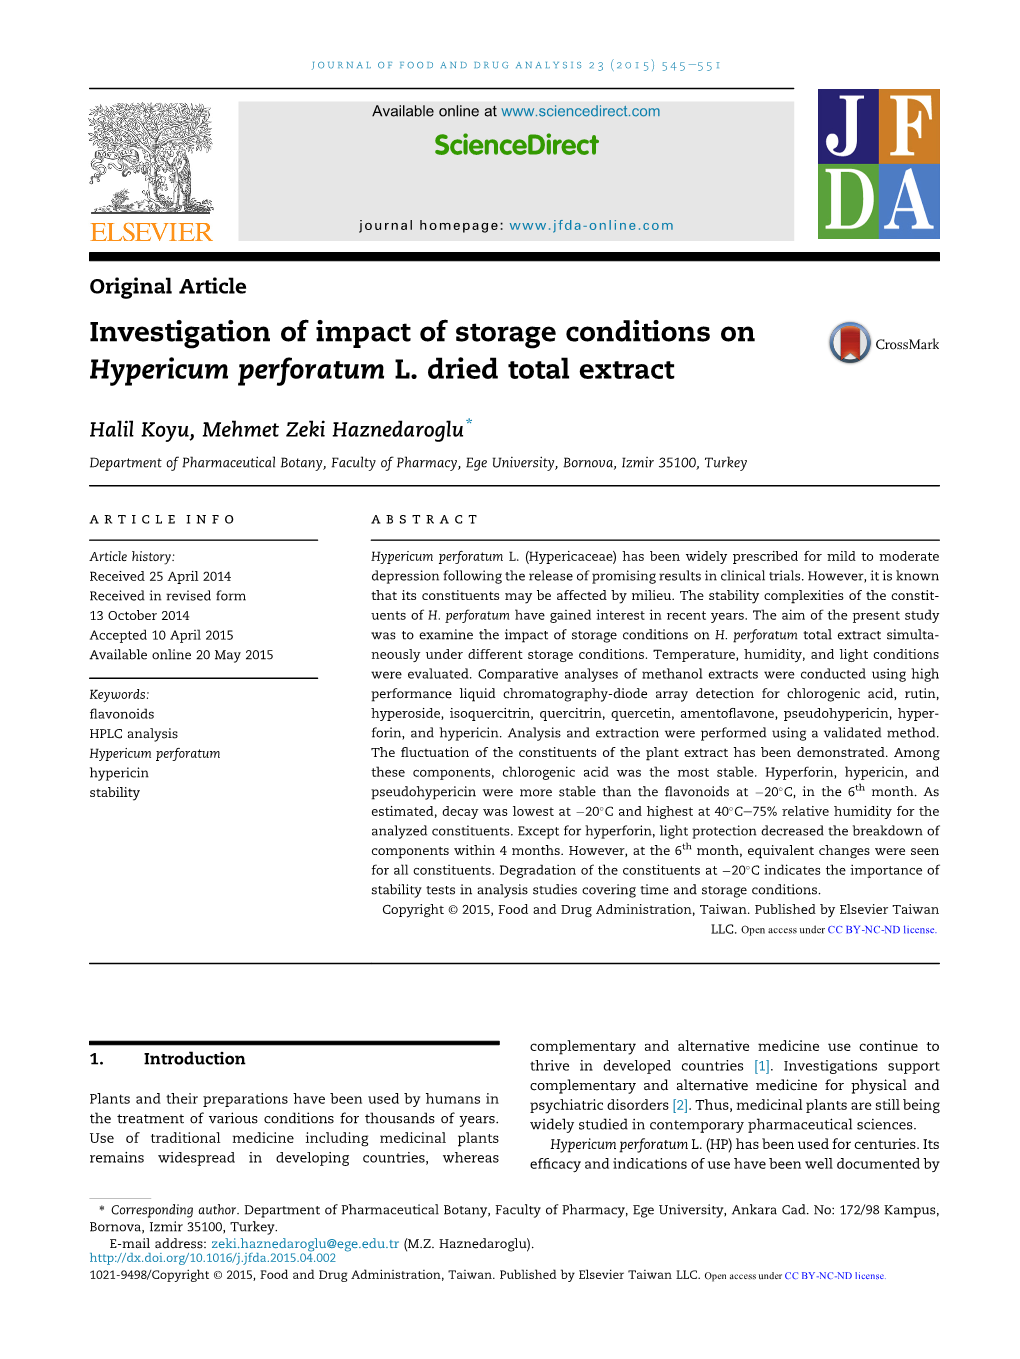 Investigation of Impact of Storage Conditions on Hypericum Perforatum L. Dried Total Extract